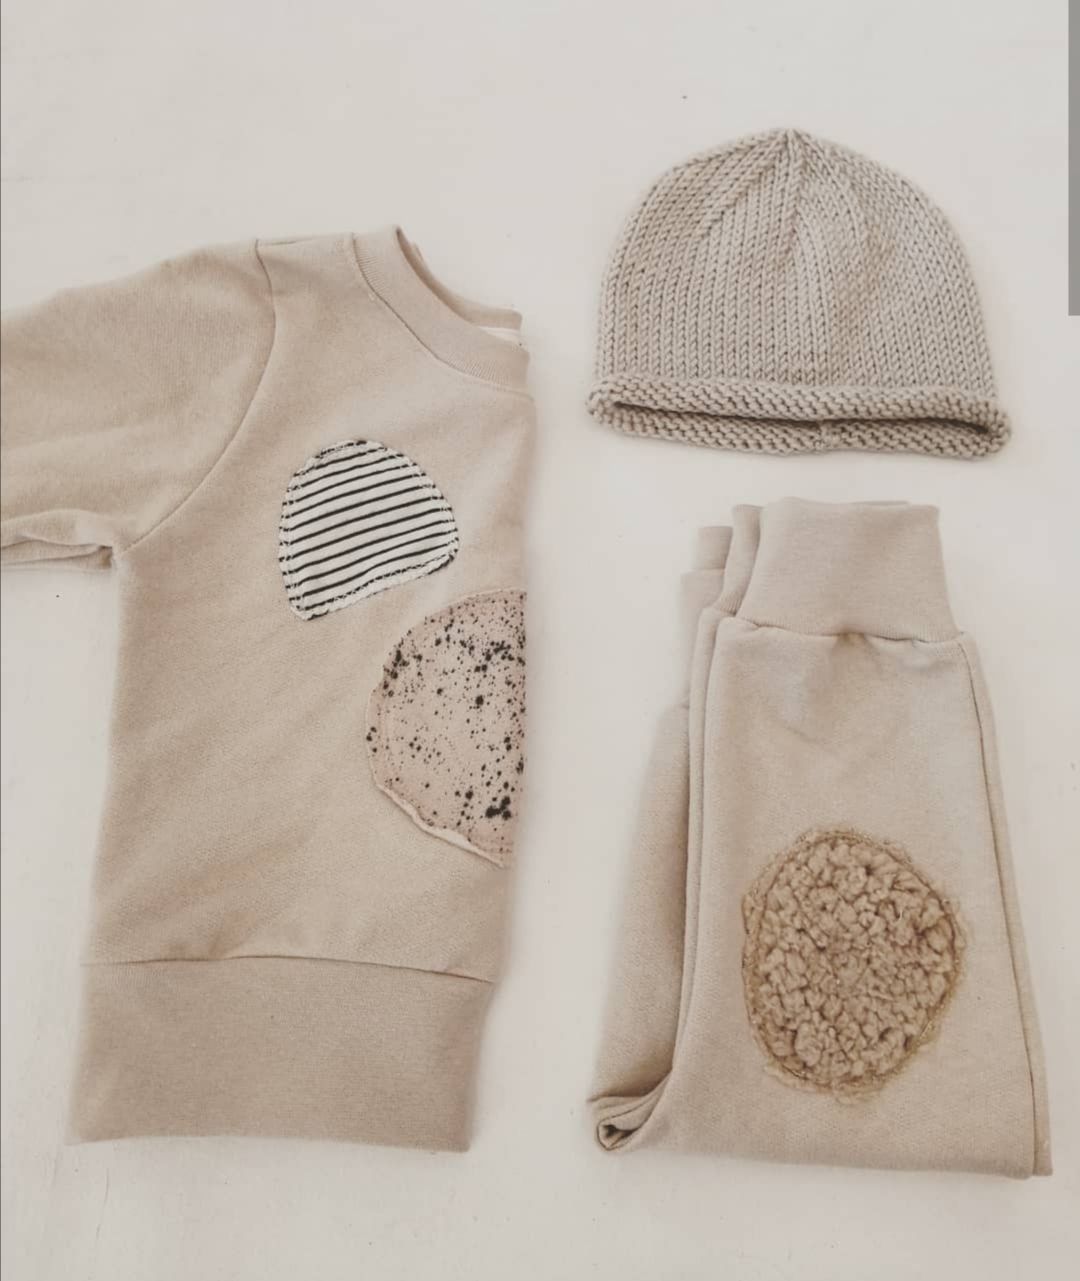 Bear Tracksuit Including Knit beanie